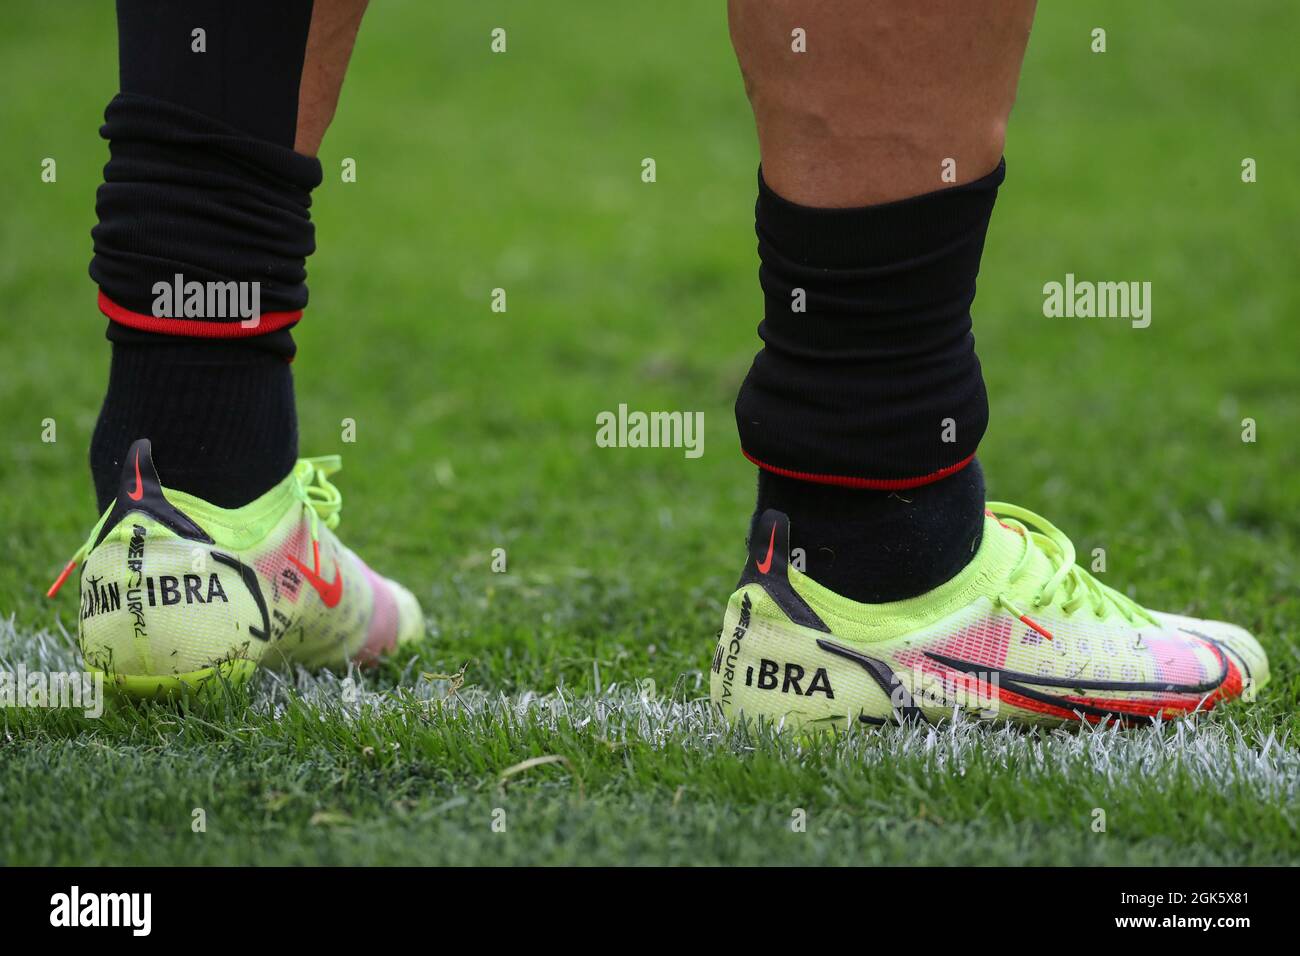 Milan, Italy, 12th September 2021. Zlatan Ibrahimovic of AC Milan's Nike Mercurial football boots during the warm up prior to the Serie A match at Giuseppe Meazza, Milan. Picture credit should